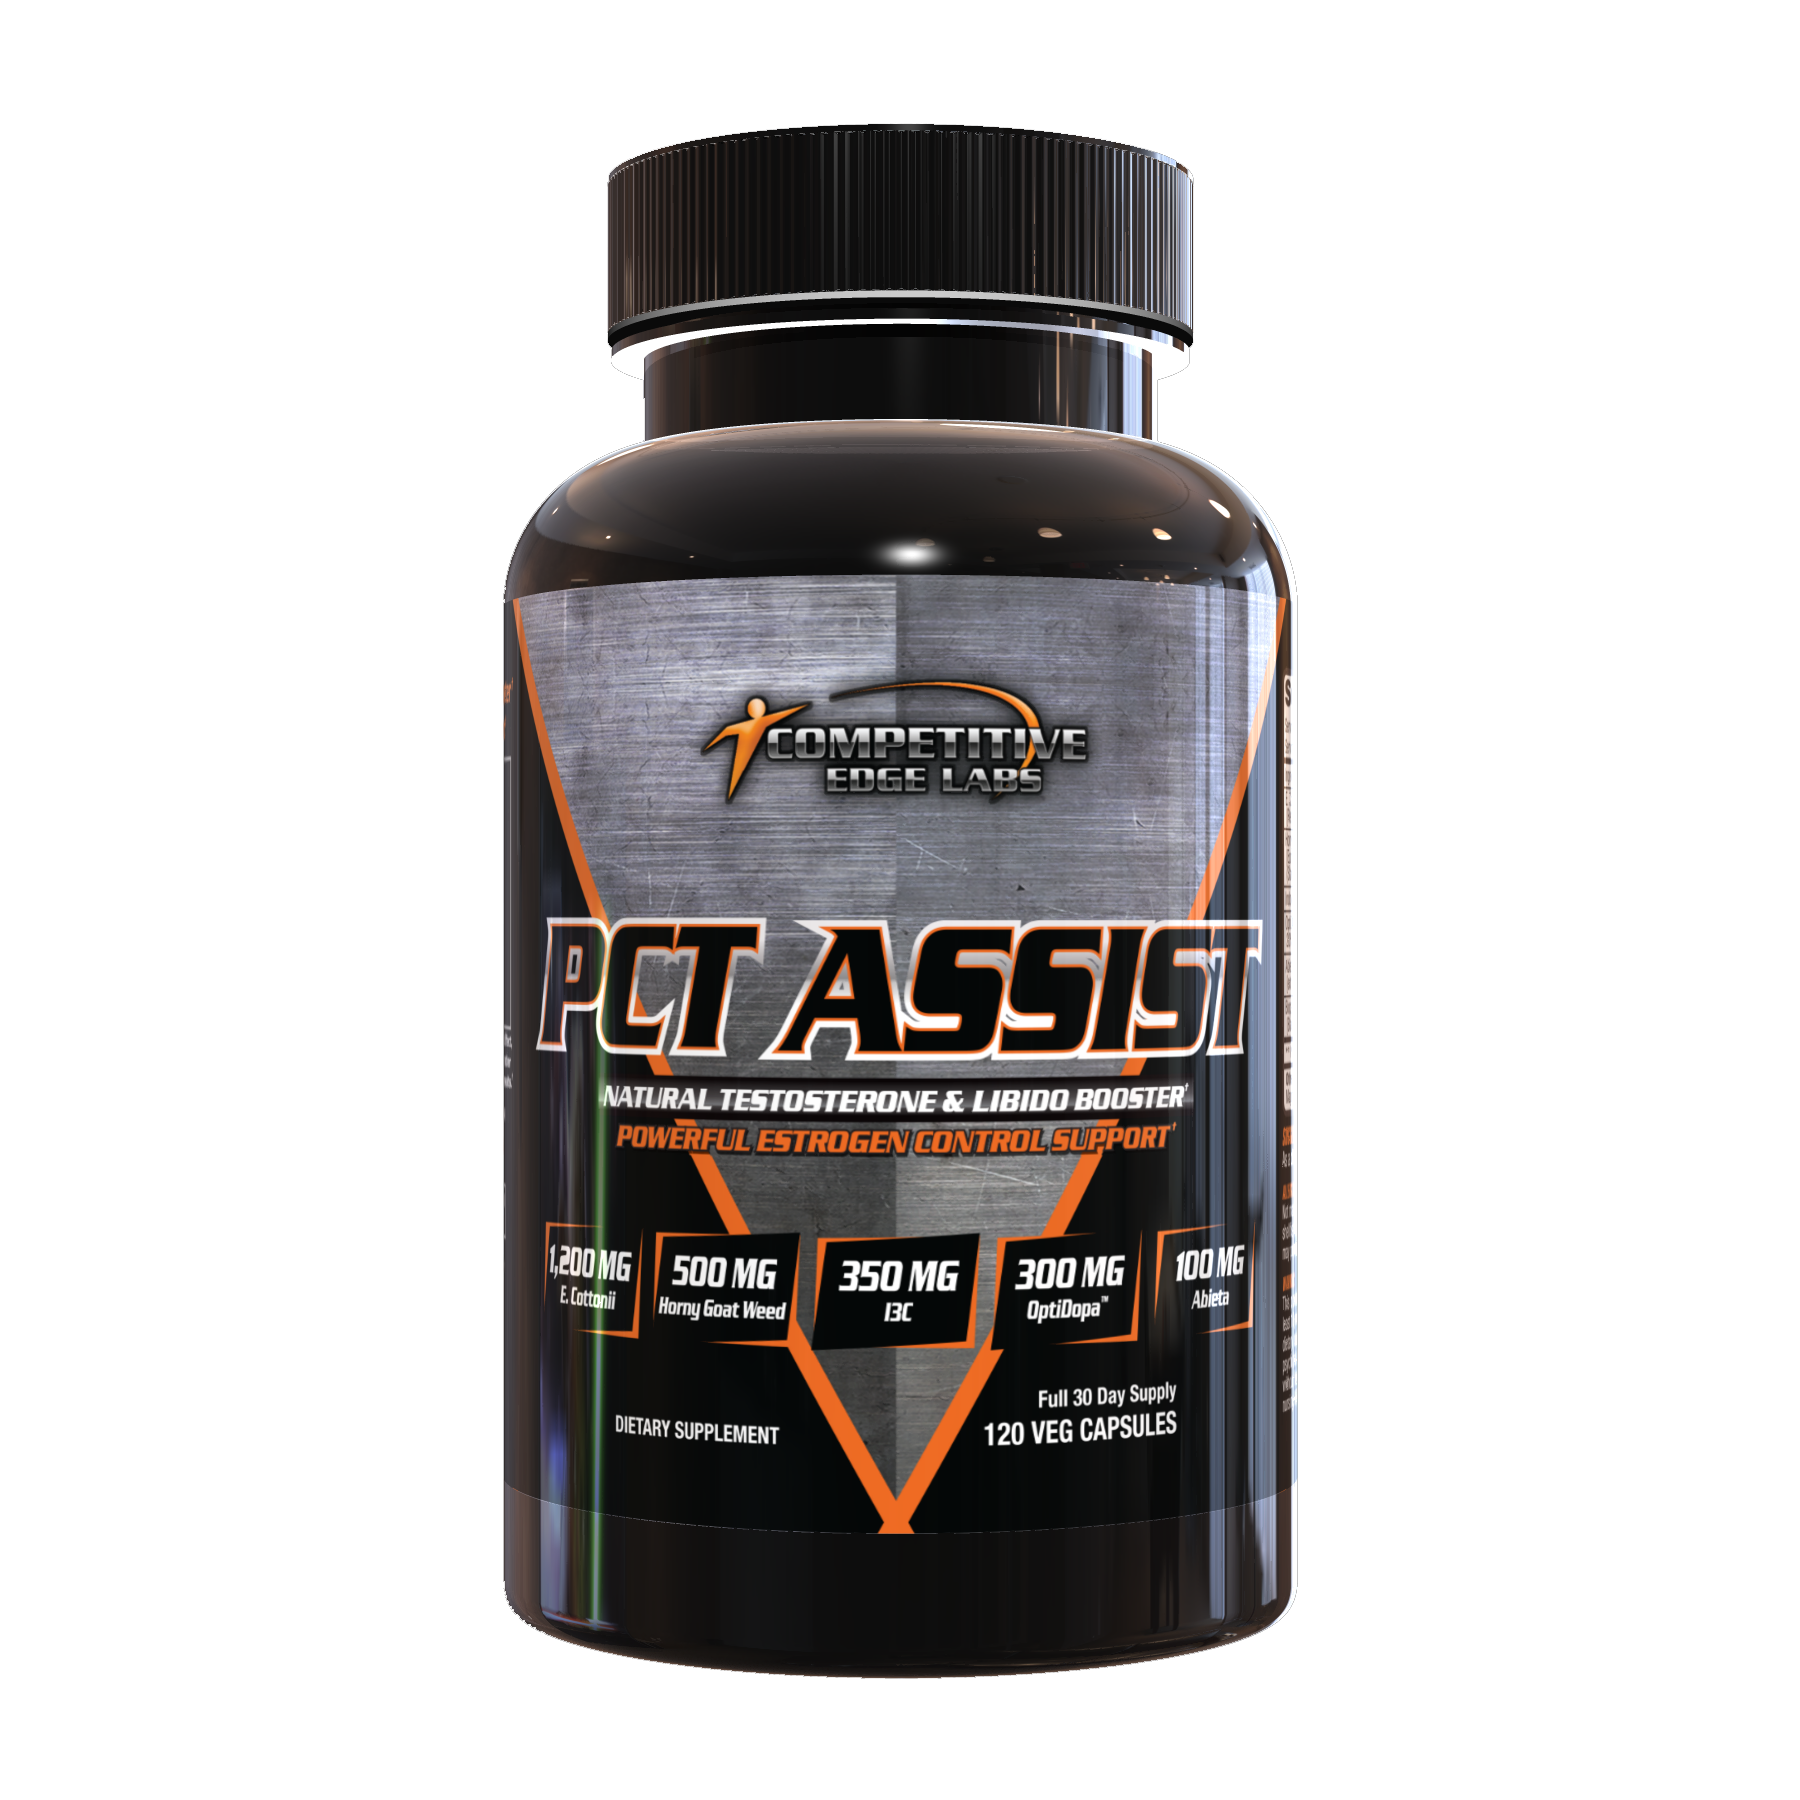 Competitive Edge Labs PCT Assist - Front of the Bottle